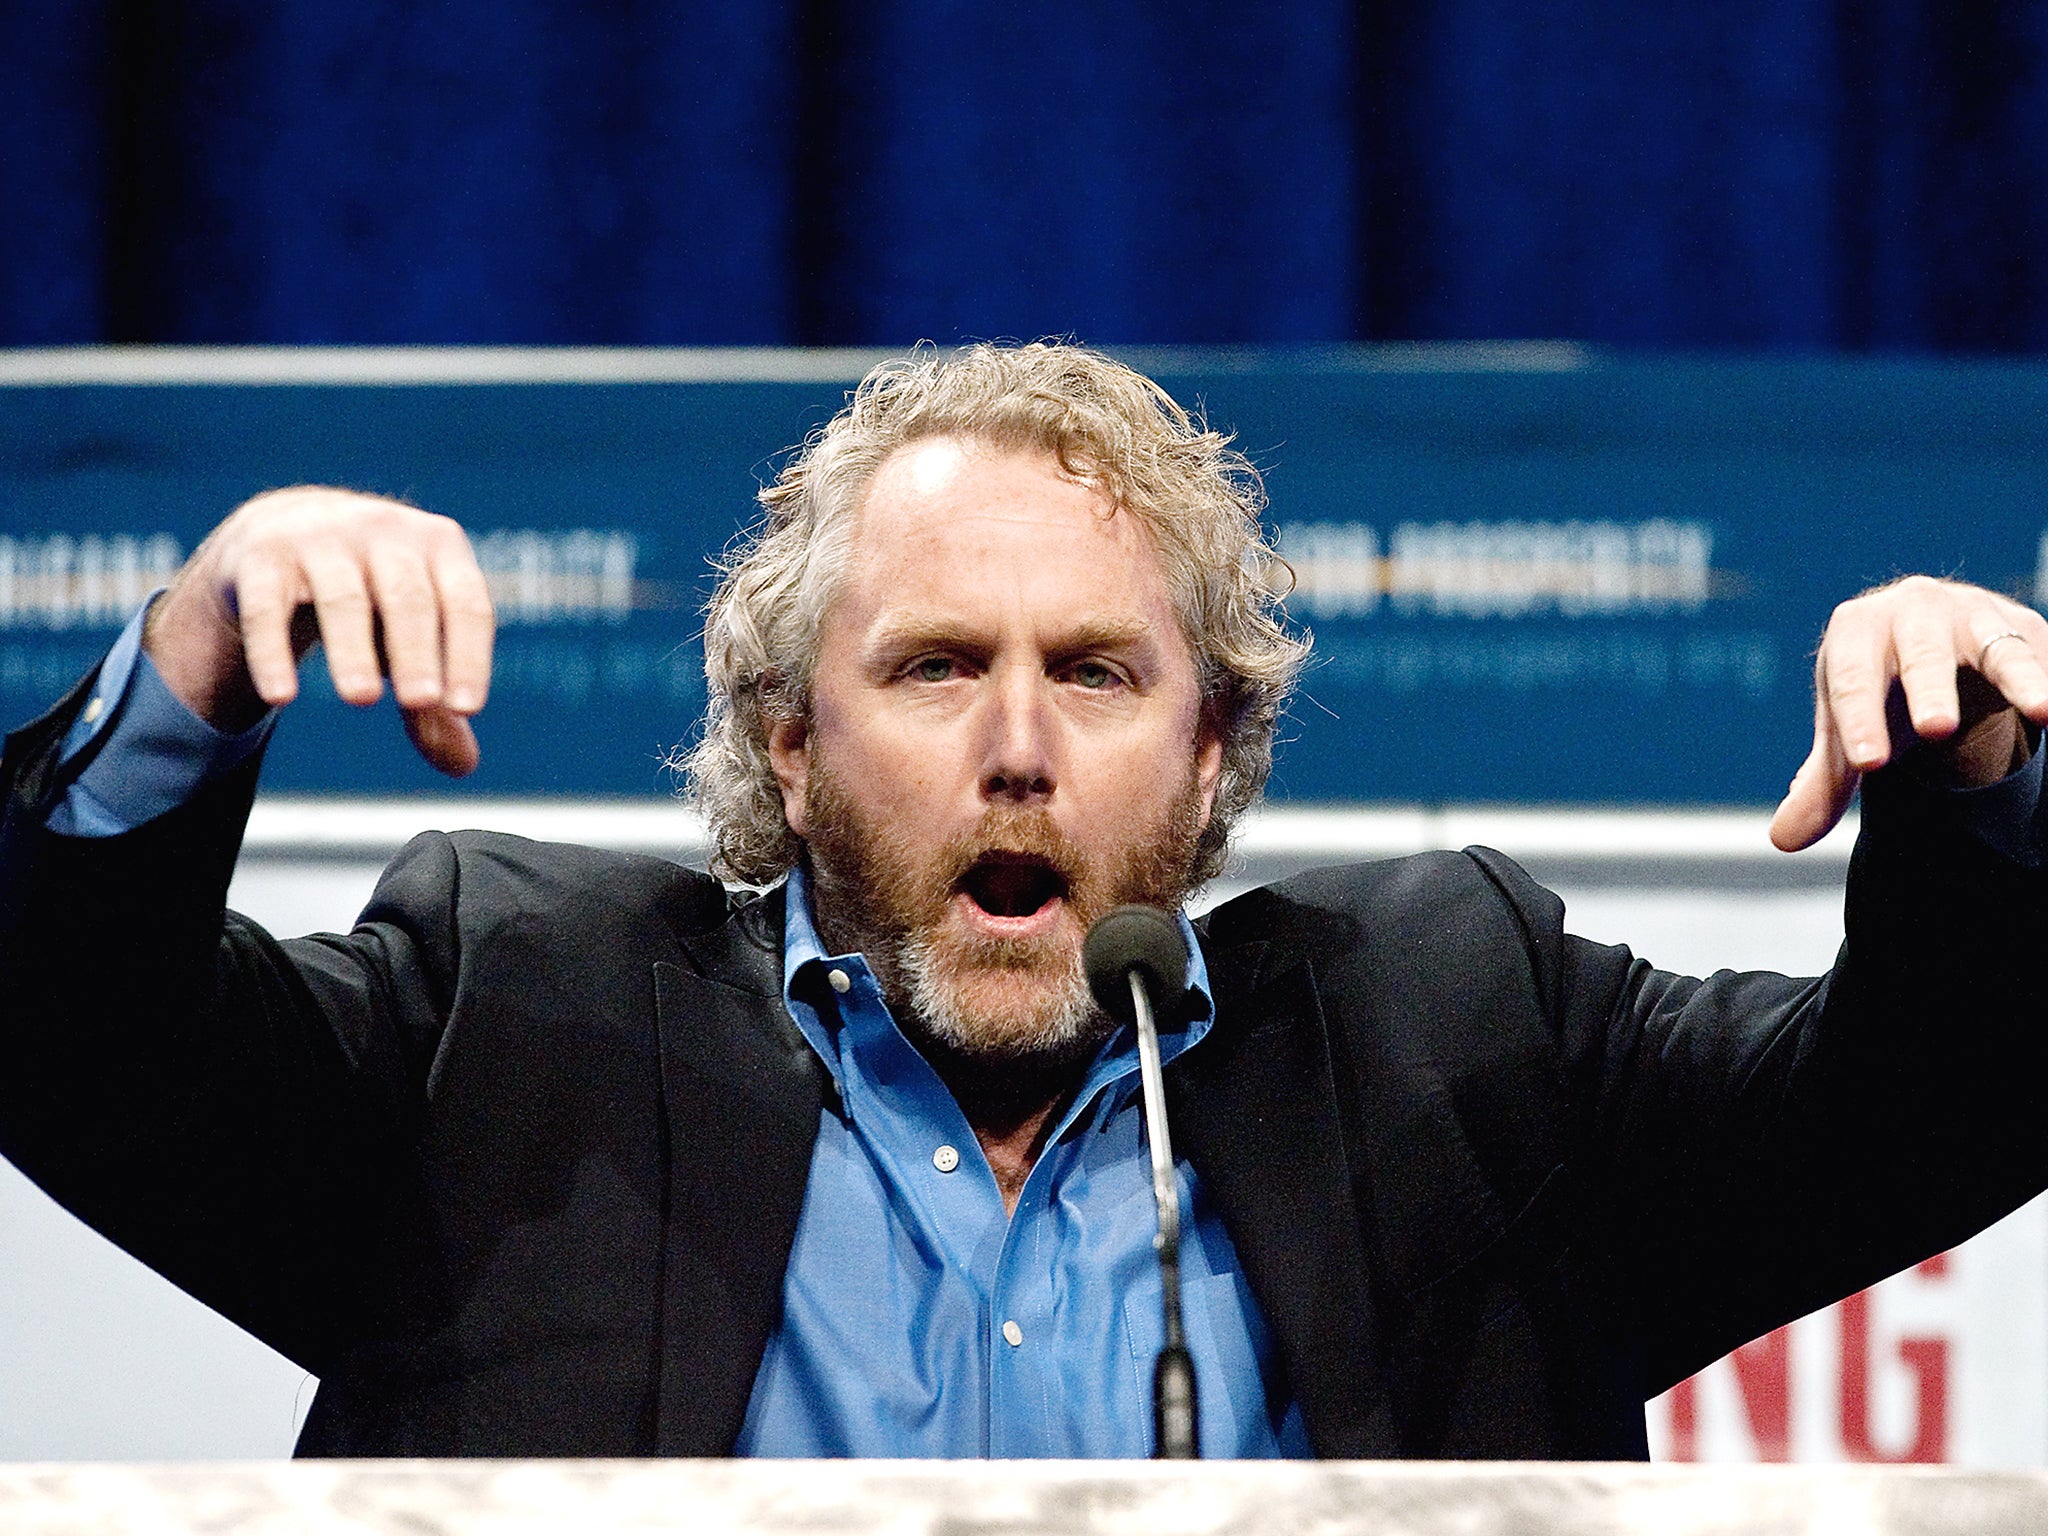 Andrew Breitbart, who conceived the eponymous news site of which Bannen was a founding member (Getty)